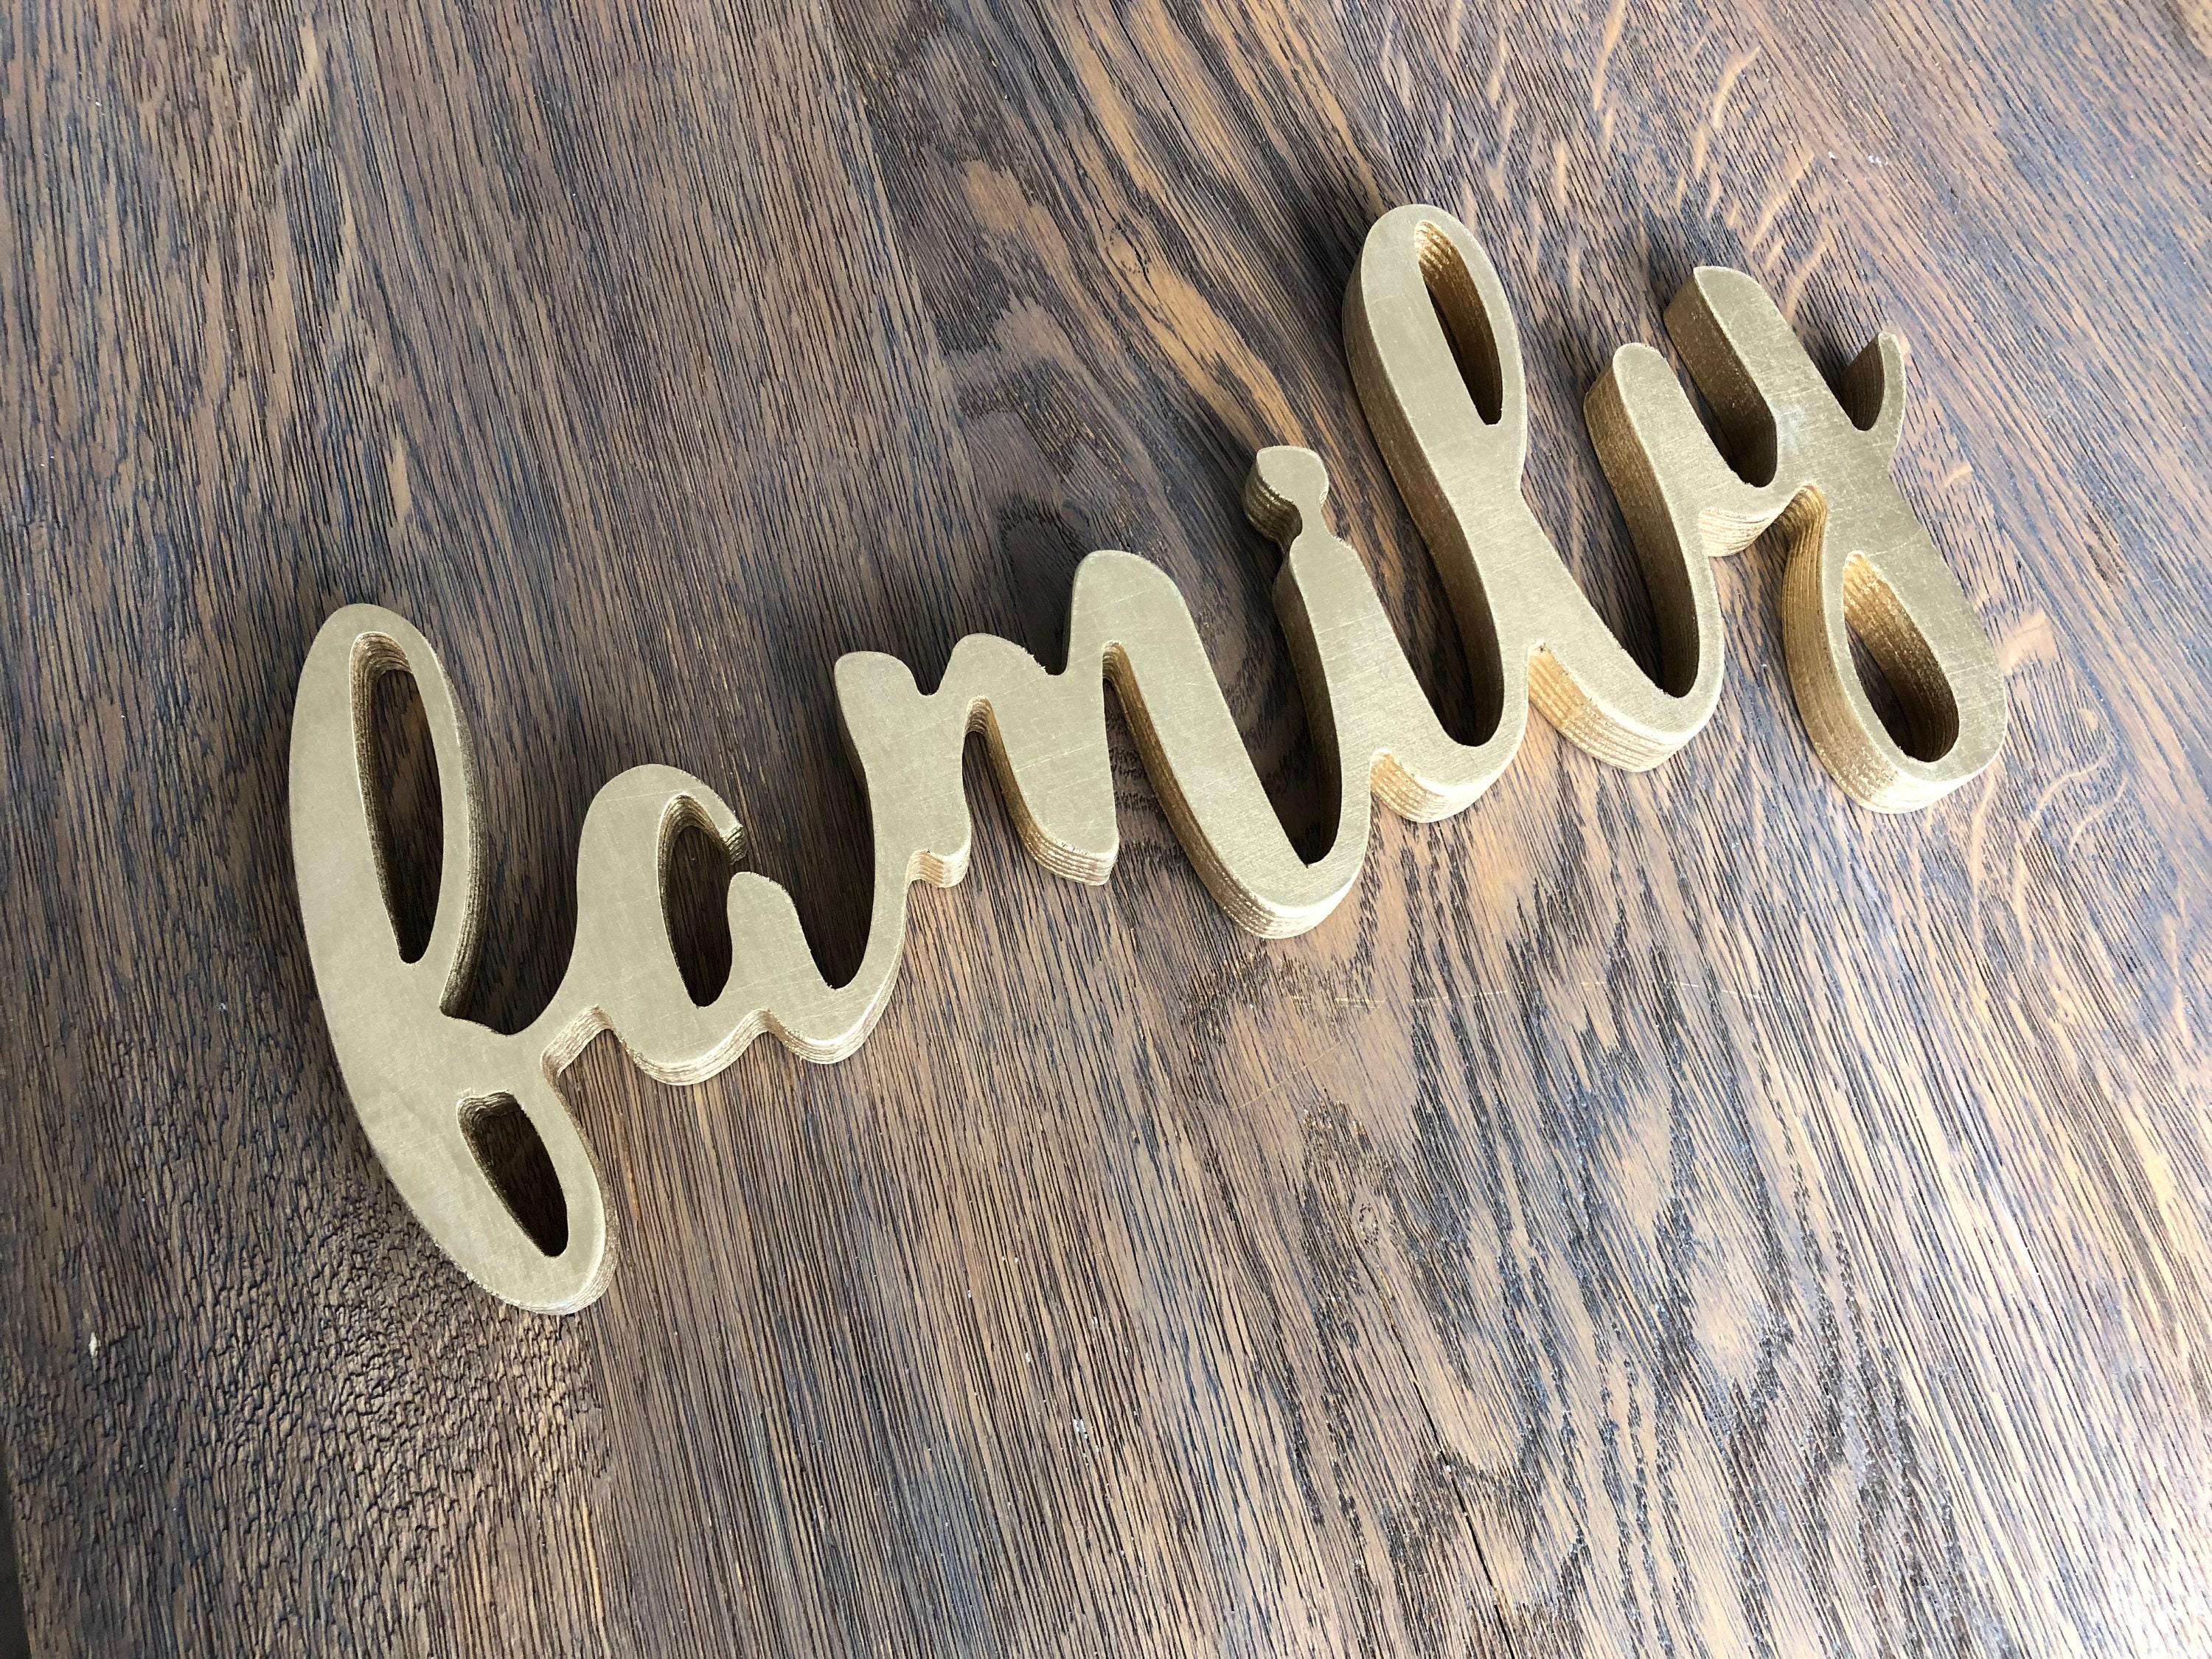  Wood Letters for Wall Decor Name Wood Sign in Gold Room Decor  for Teen Girls (Also in Different Colors & Sizes) : Handmade Products